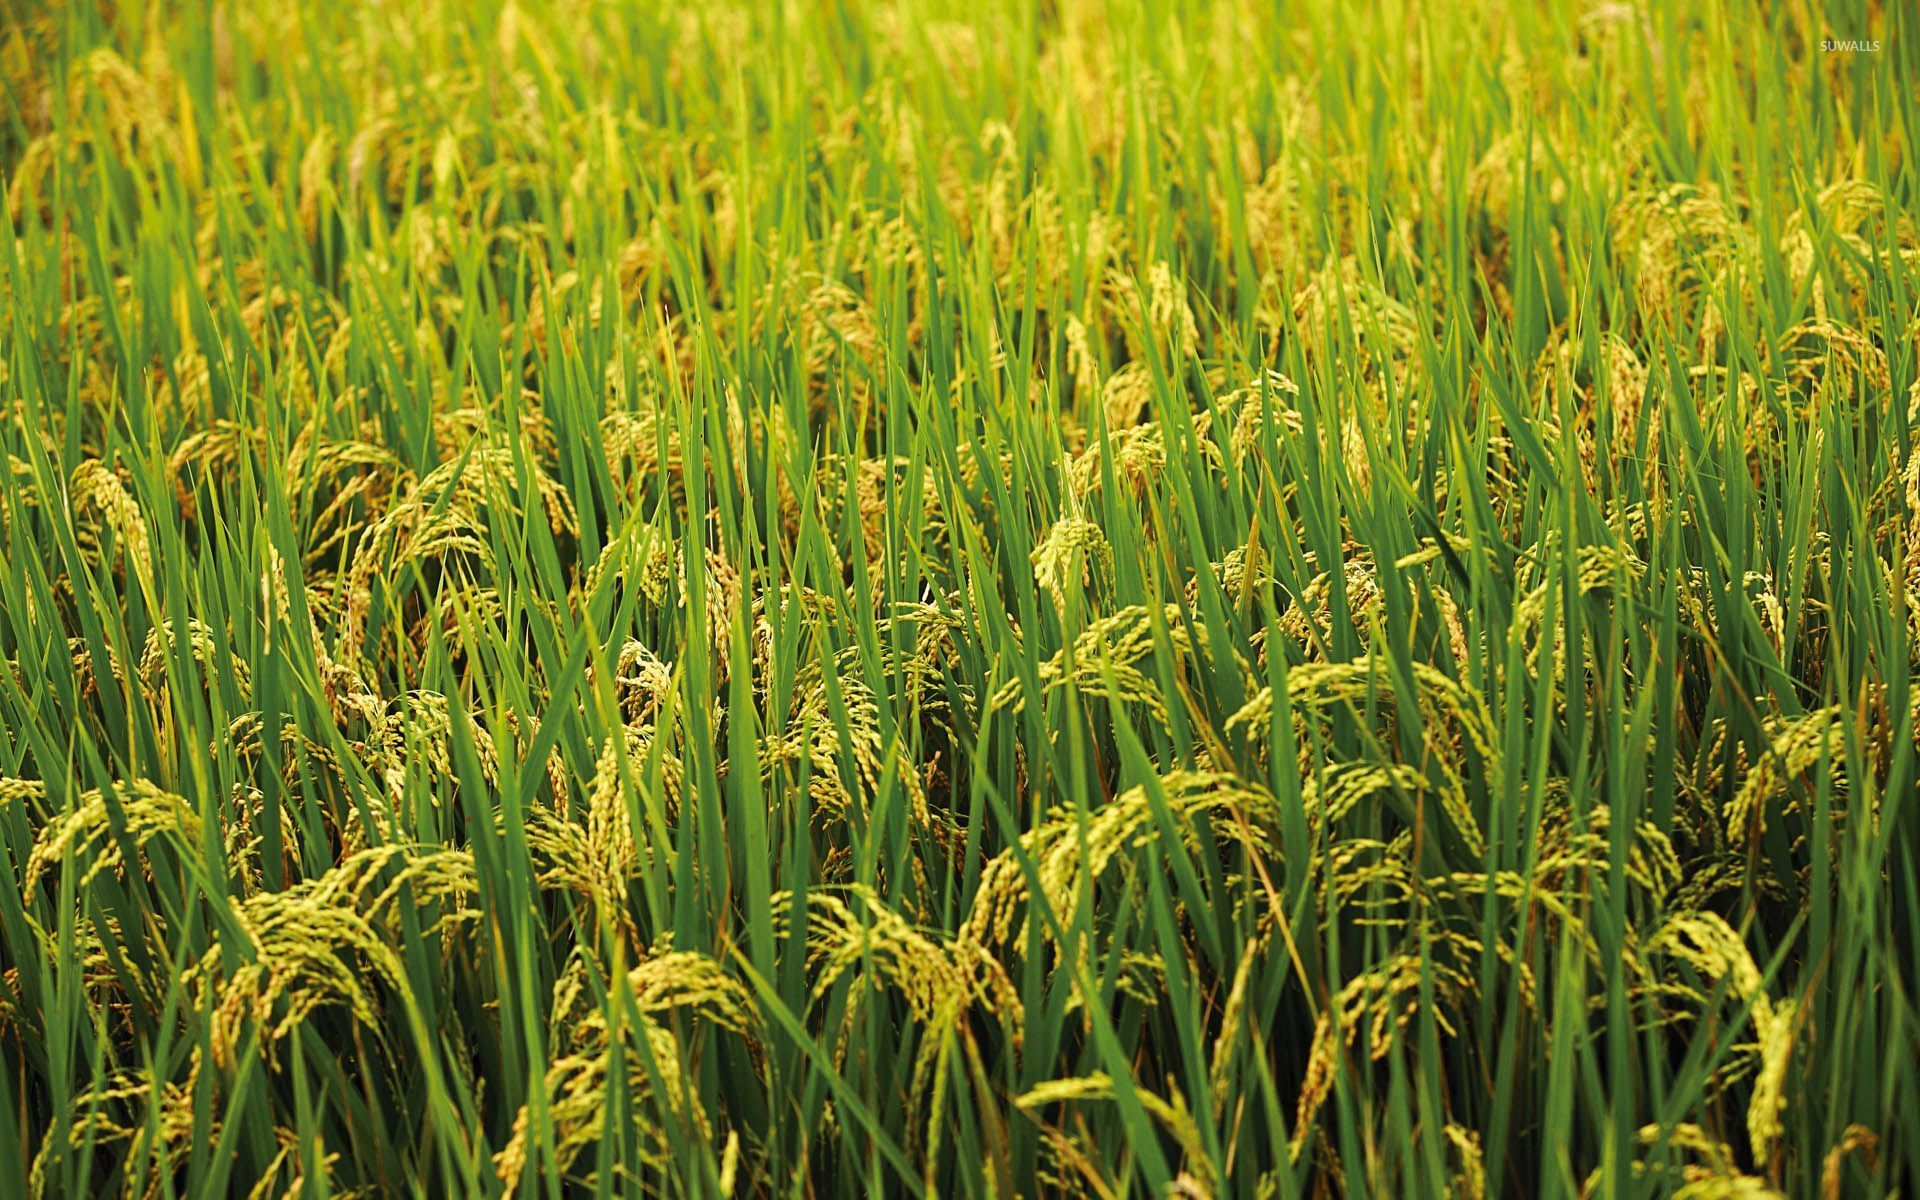 Green rice field wallpaper - Photography wallpapers - #54517